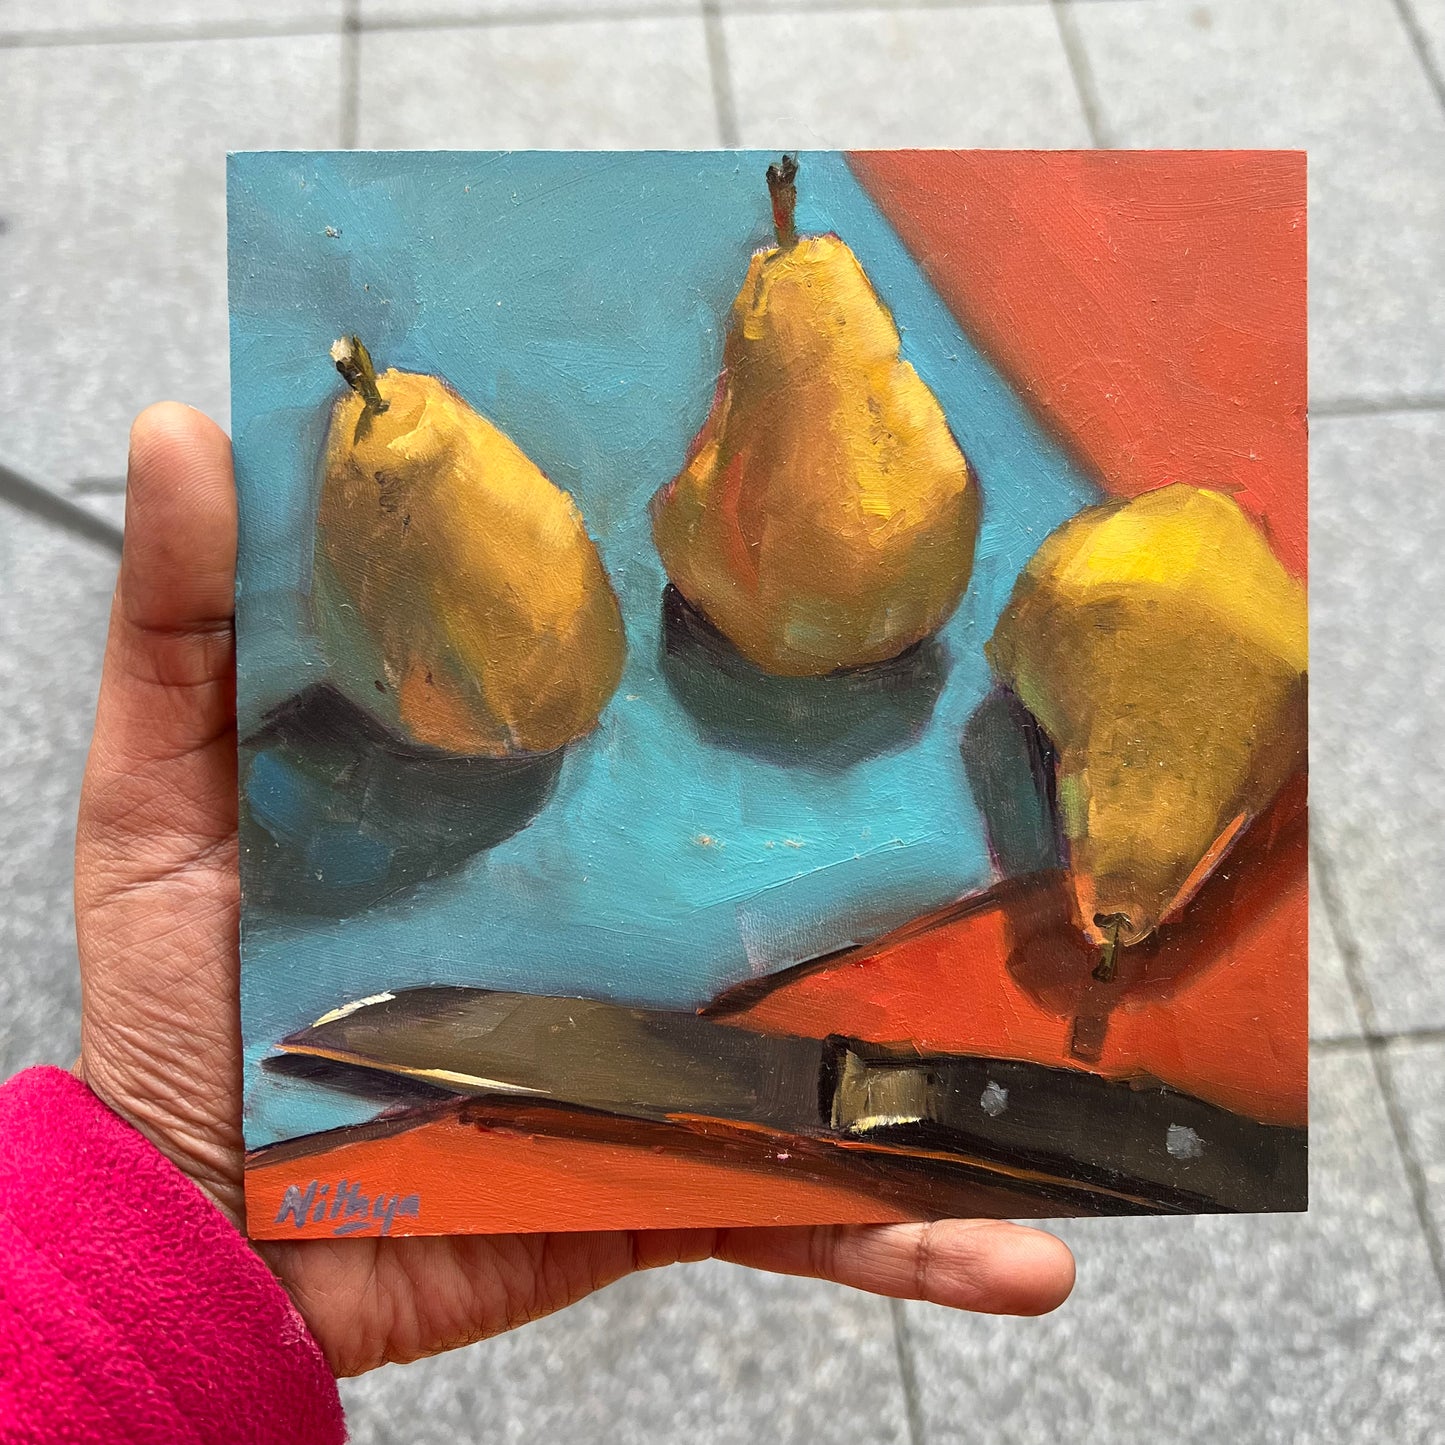 Small Oil Painting - Pears and Knife